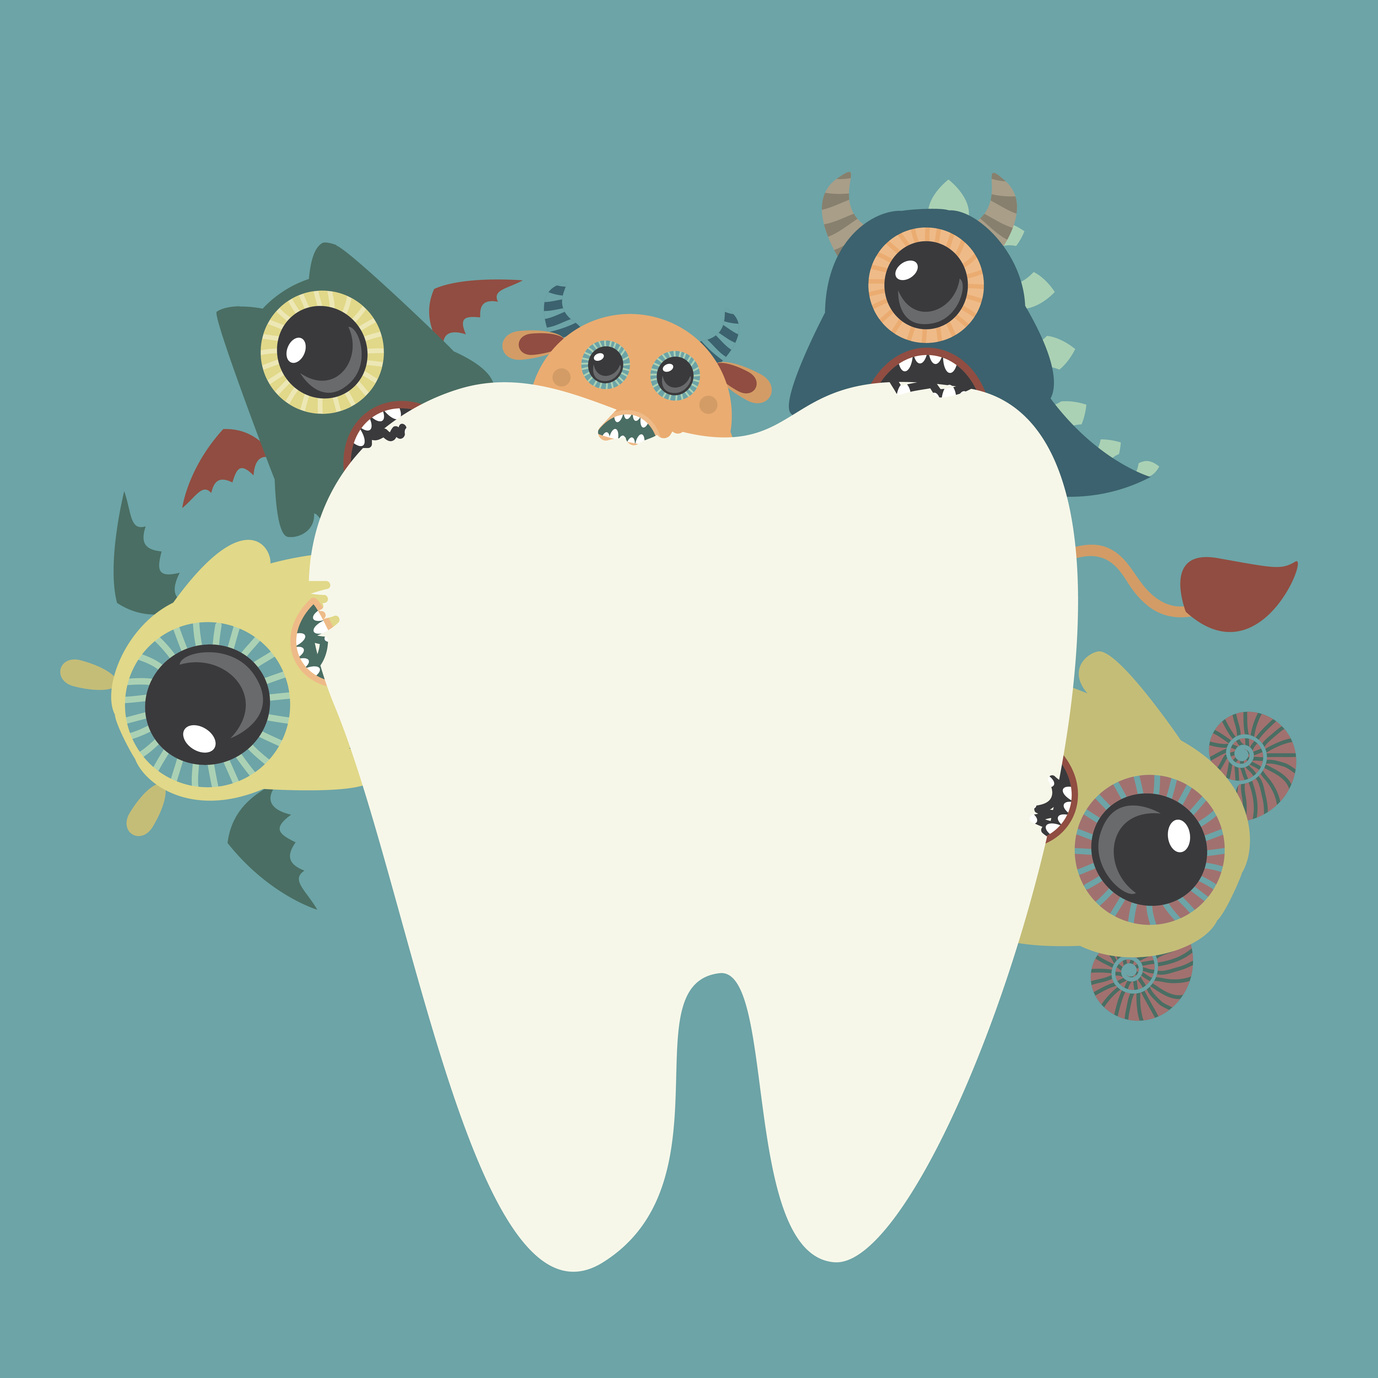 Worried about Wisdom Teeth? Here’s What you Need to Know